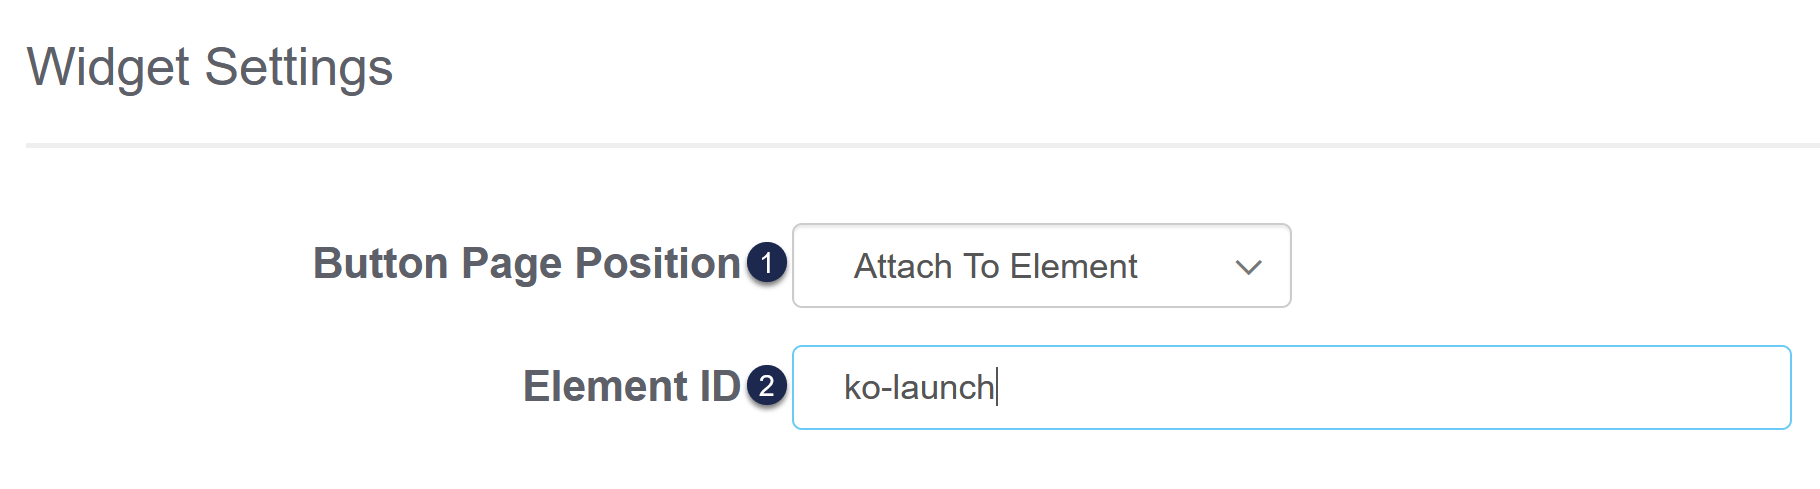 Screenshot showing the Widget Settings with Page Position selected as Attach To Element and an Element ID of ko-launch